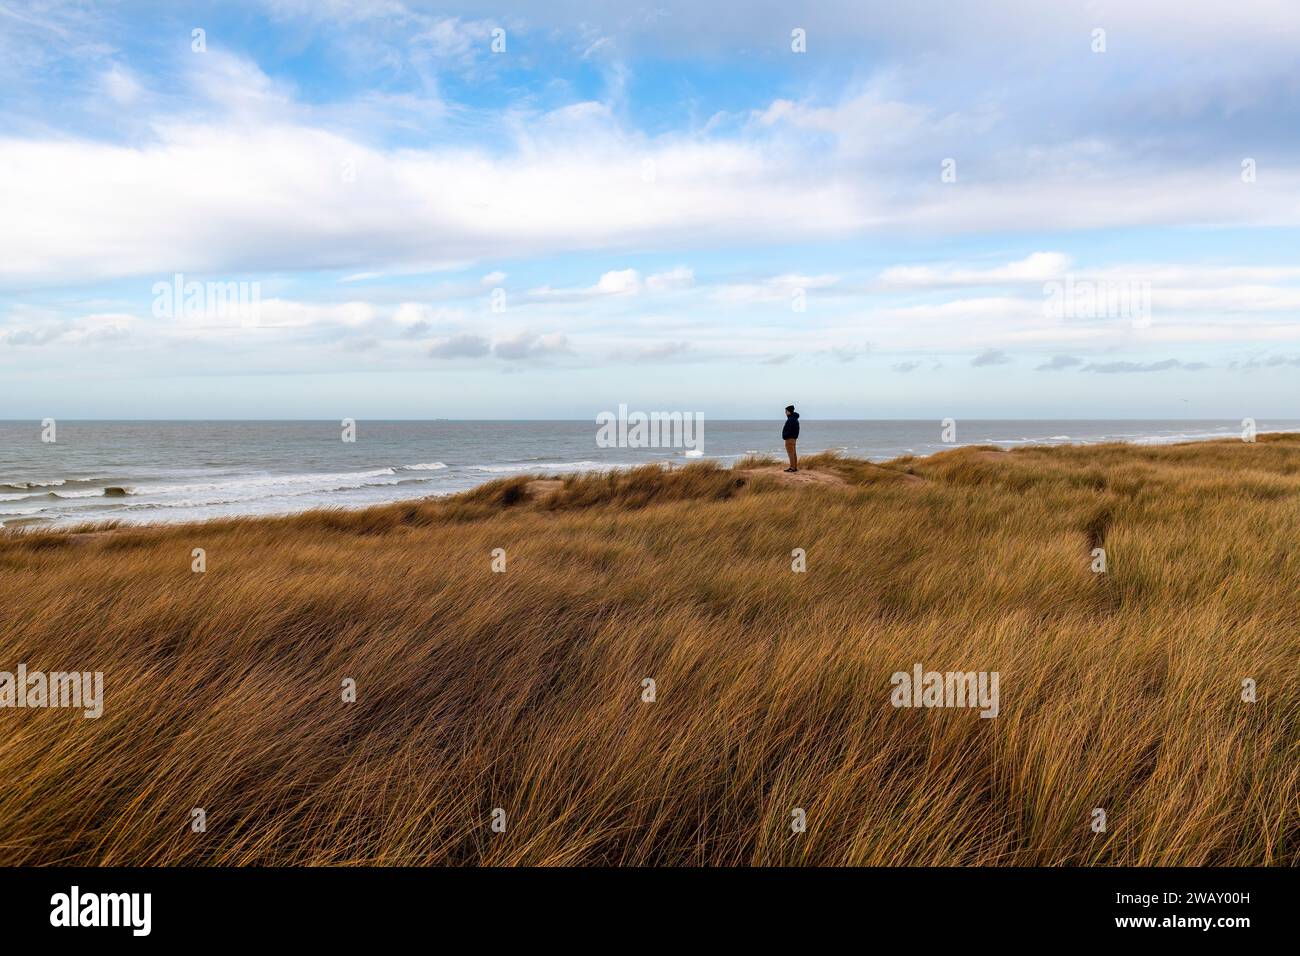 Young man looking at the North Sea waves from the sand dunes along the Belgian coast, Bredene, Belgium. Stock Photo